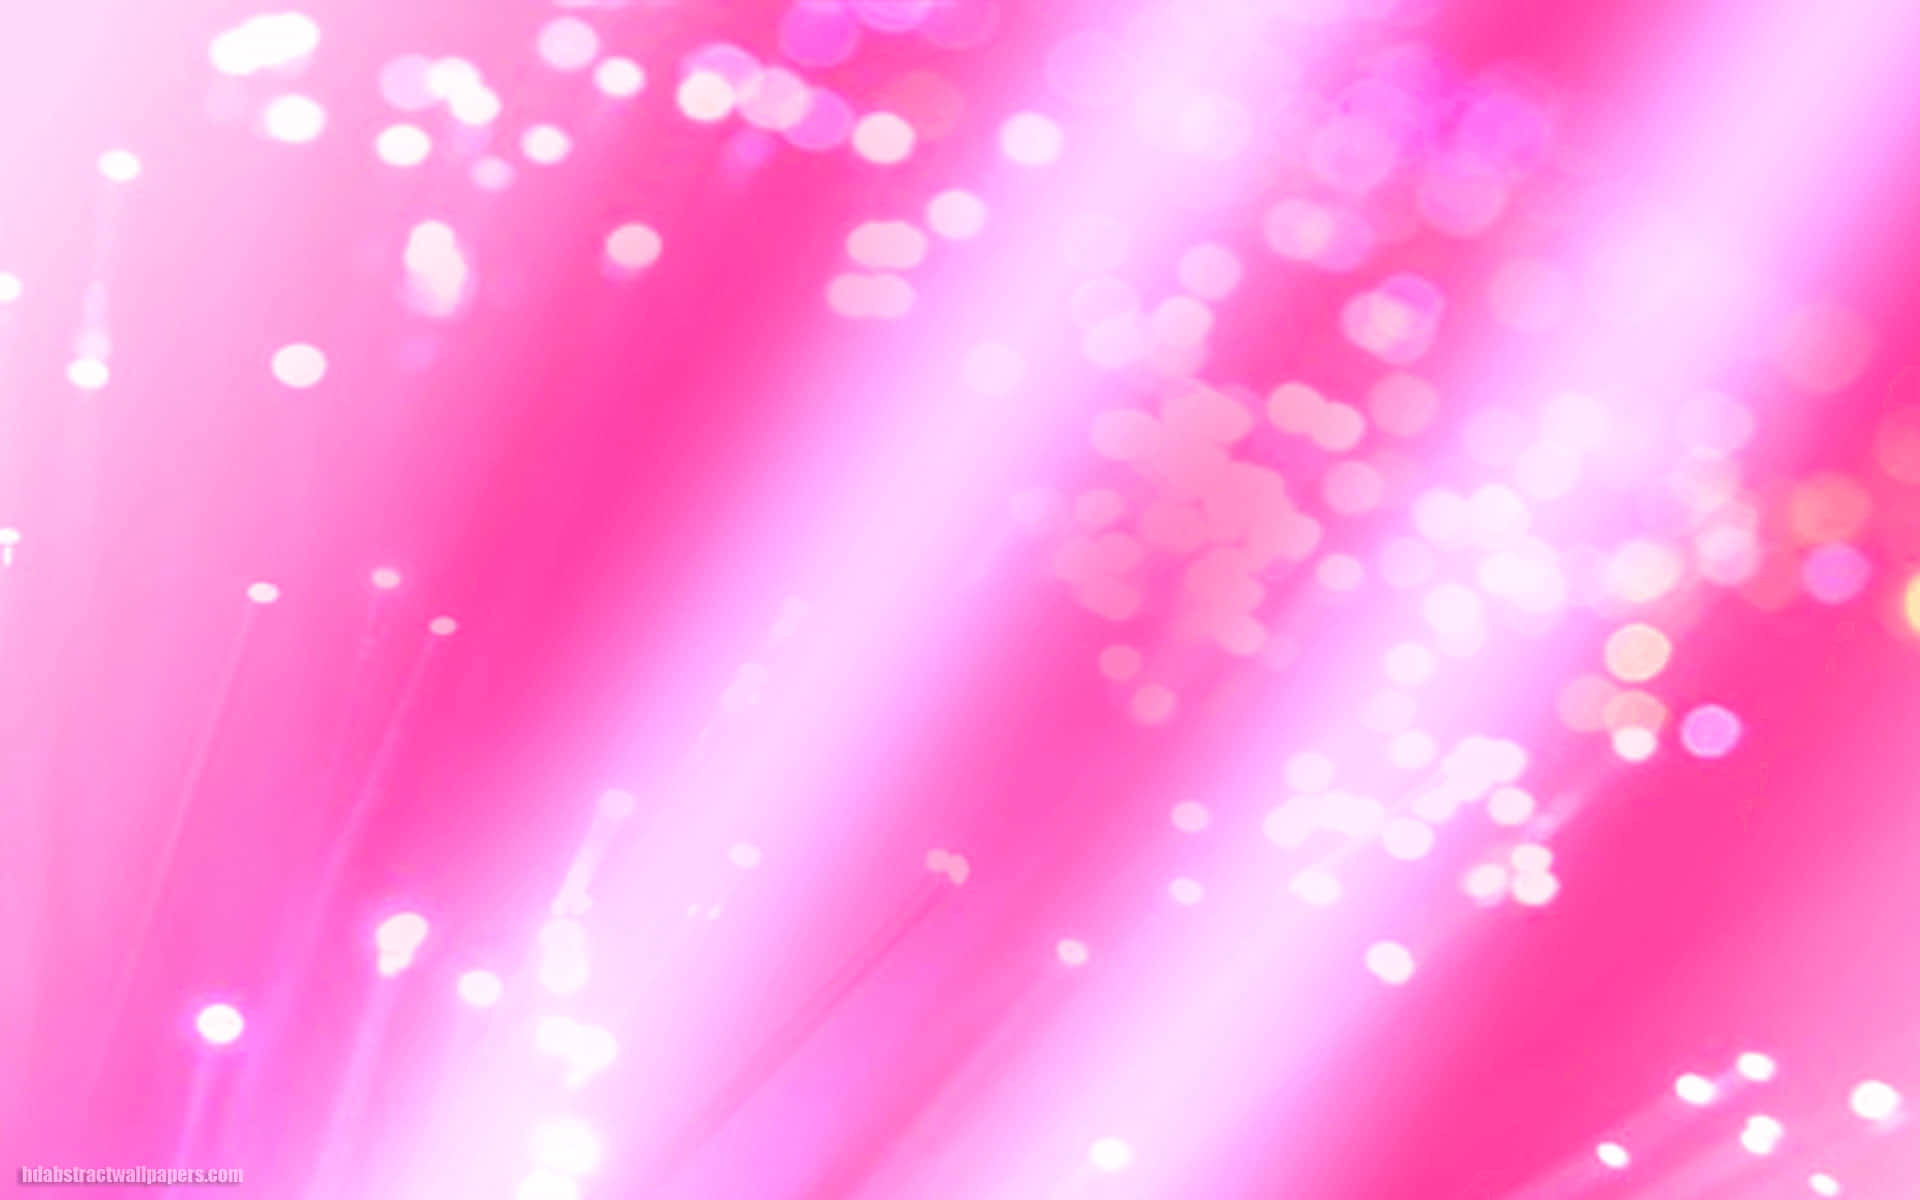 Bright and Bold Pink Abstract Background